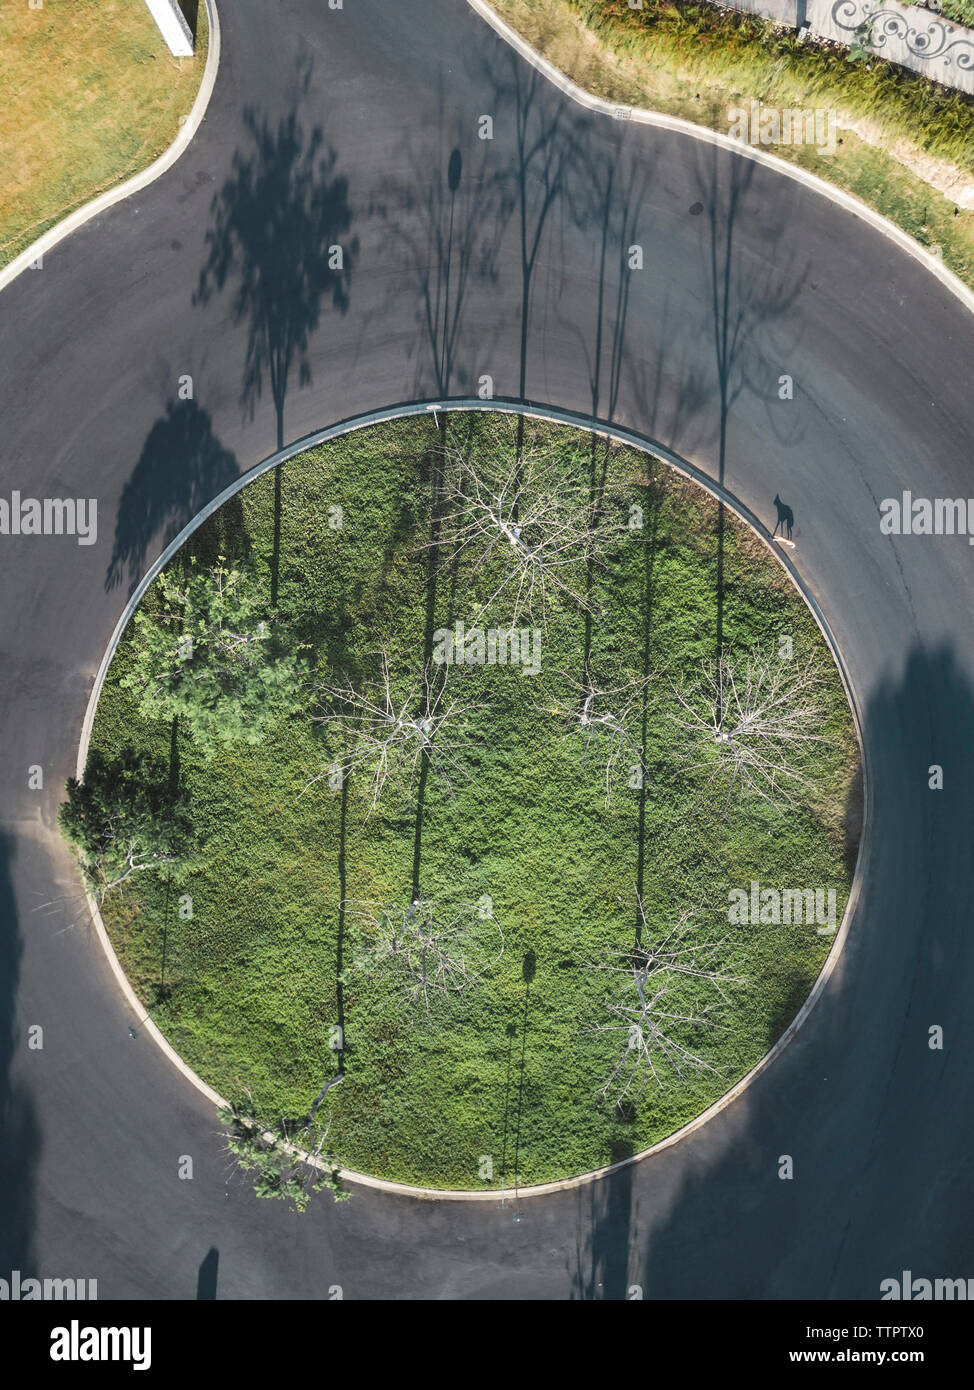 Aerial view of plants and trees growing amidst circle shaped empty road in park Stock Photo